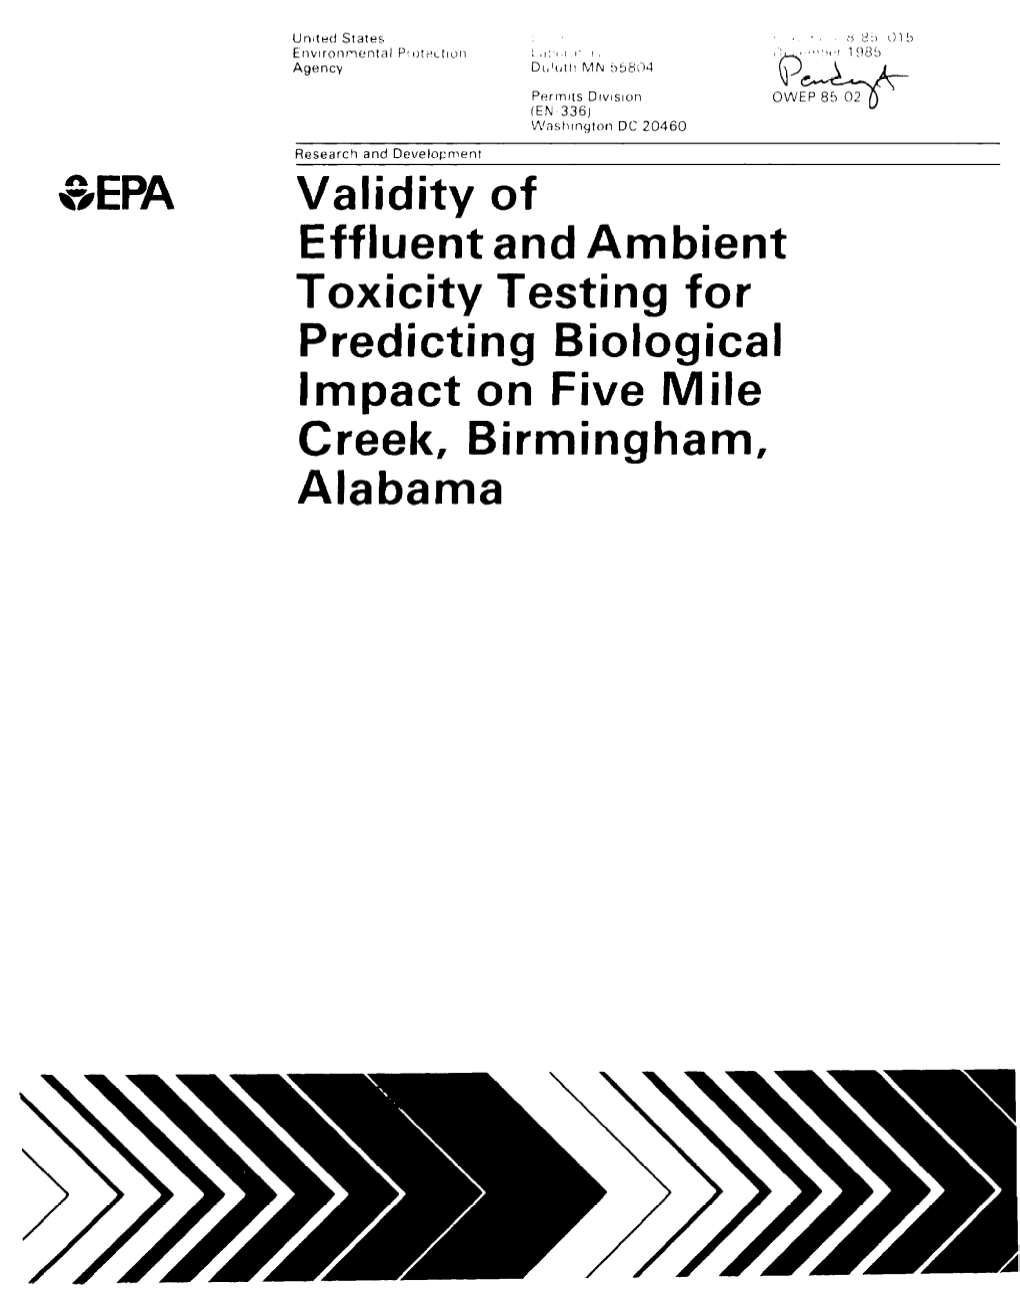 Validity of Effluent and Ambient Toxicity Tests for Predicting